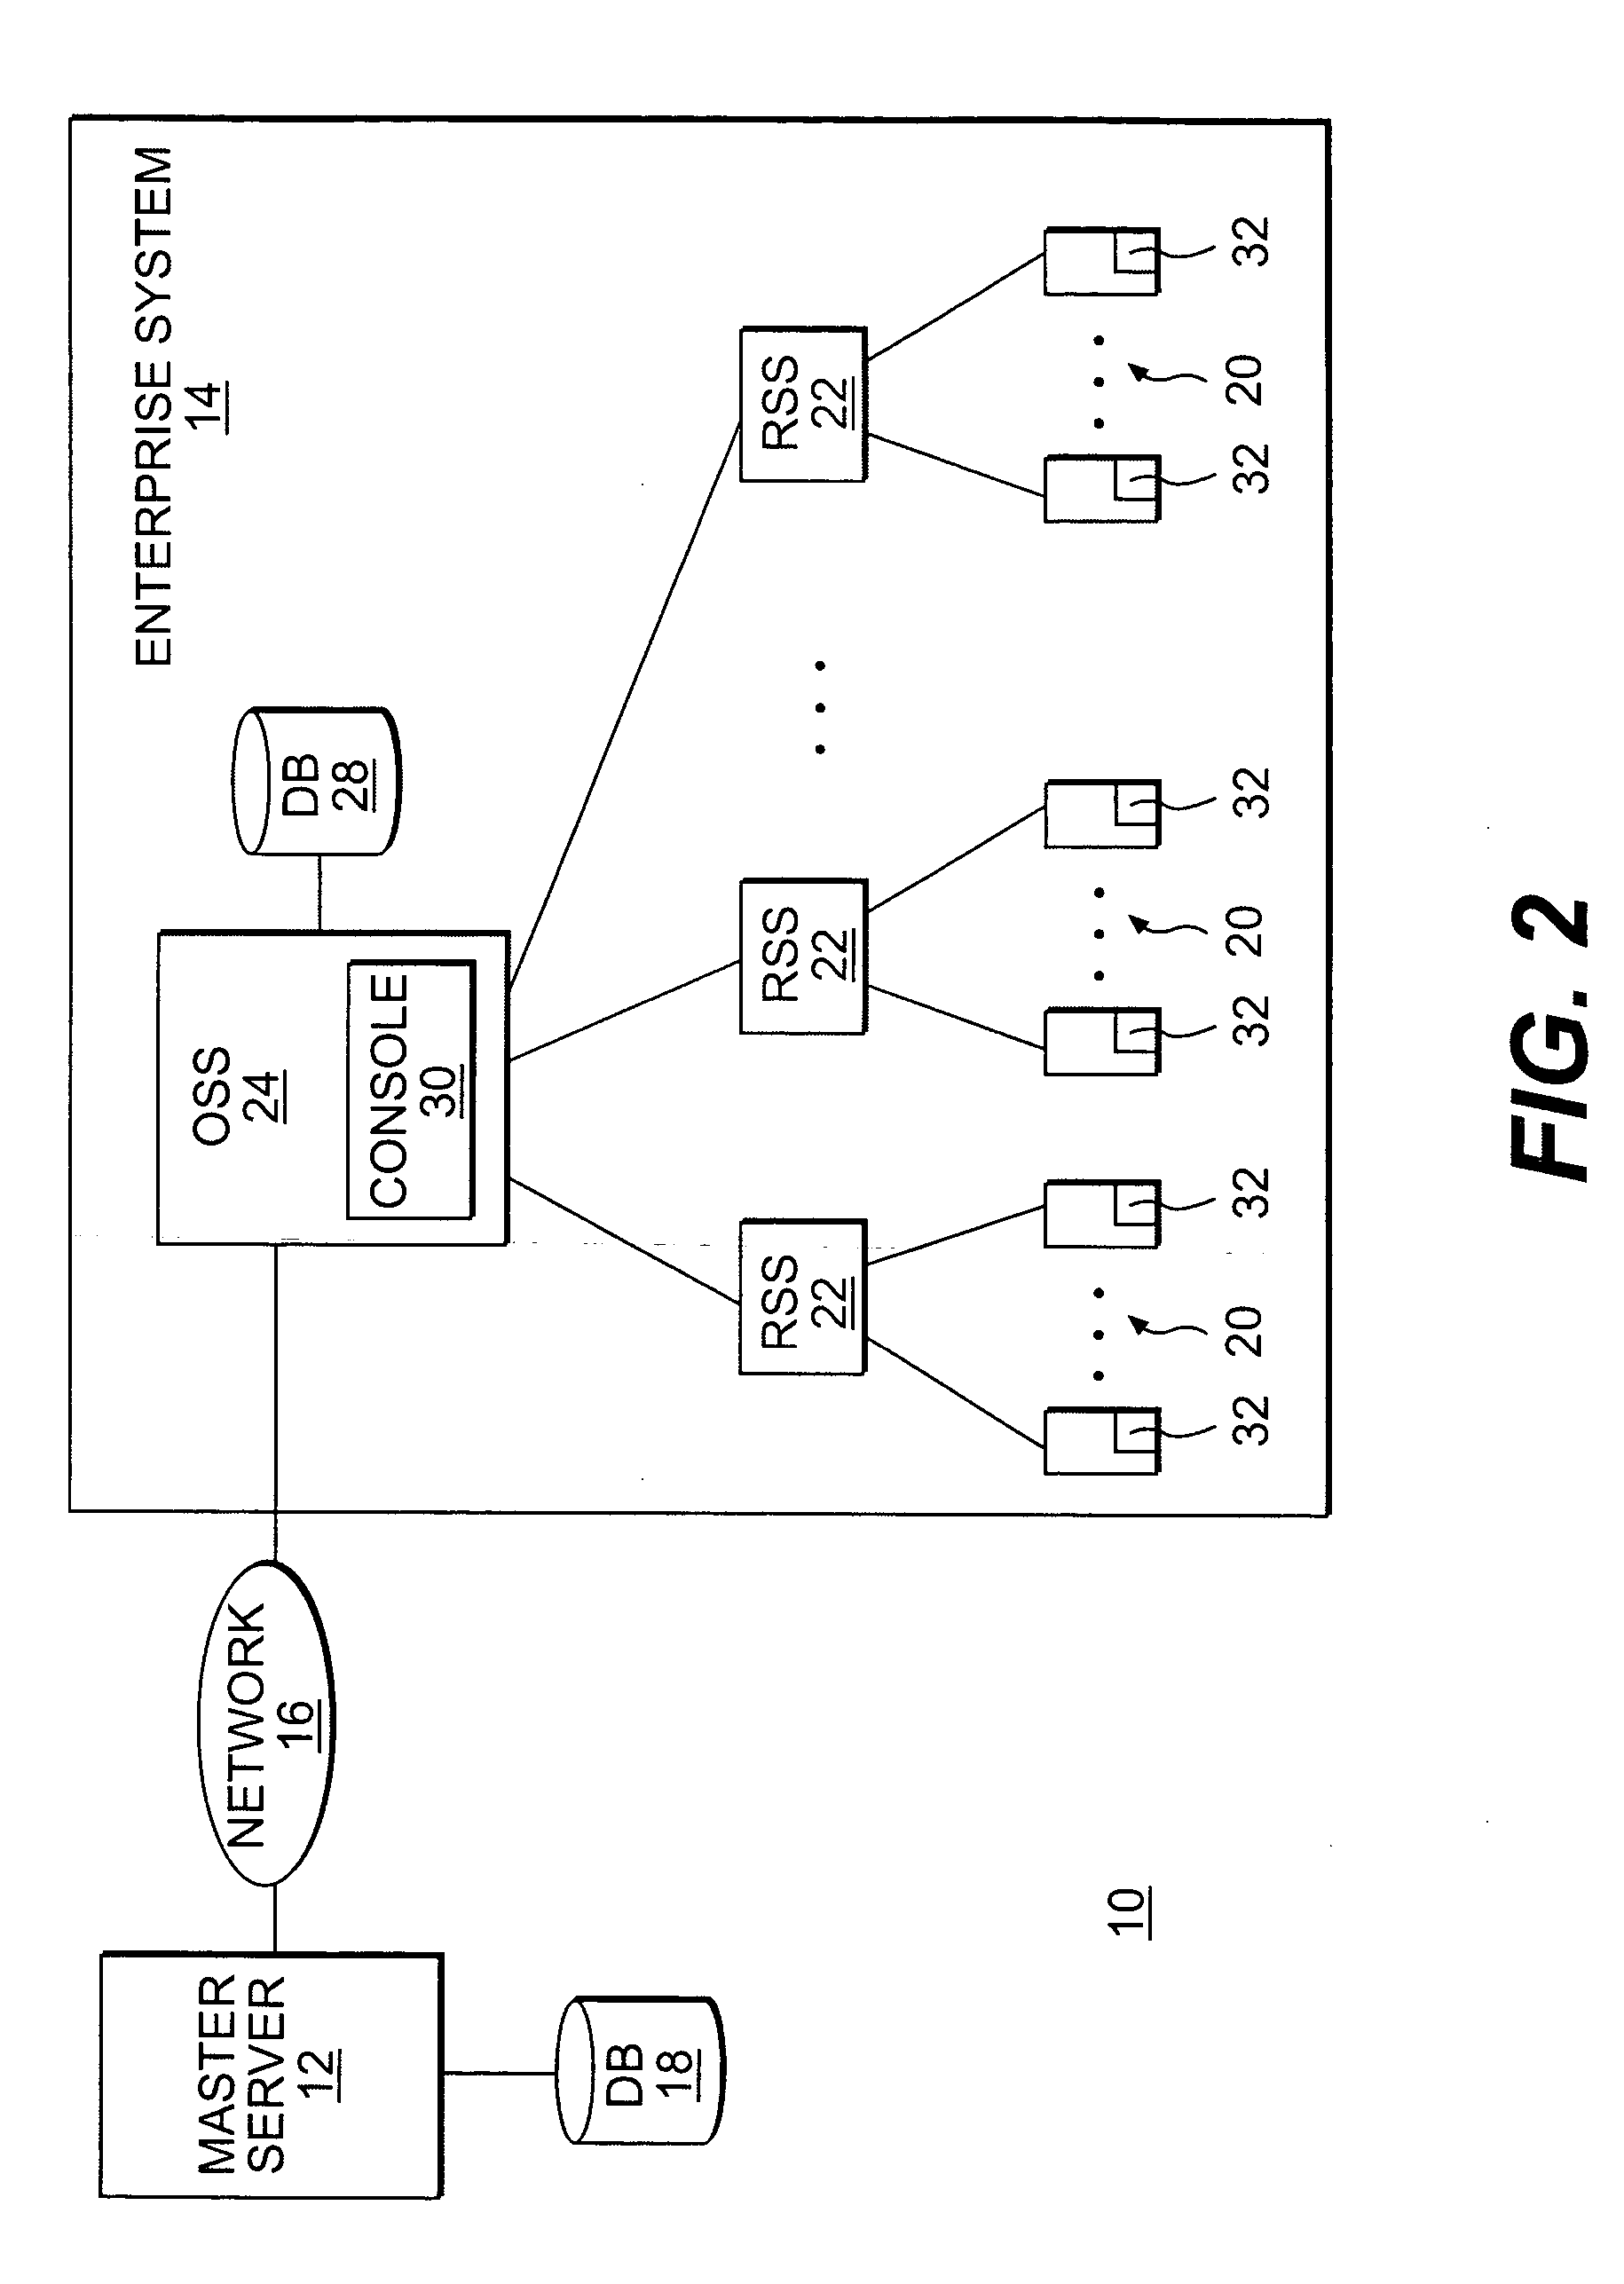 Method, system and article of manufacture for data preservation and automated electronic software distribution across an enterprise system